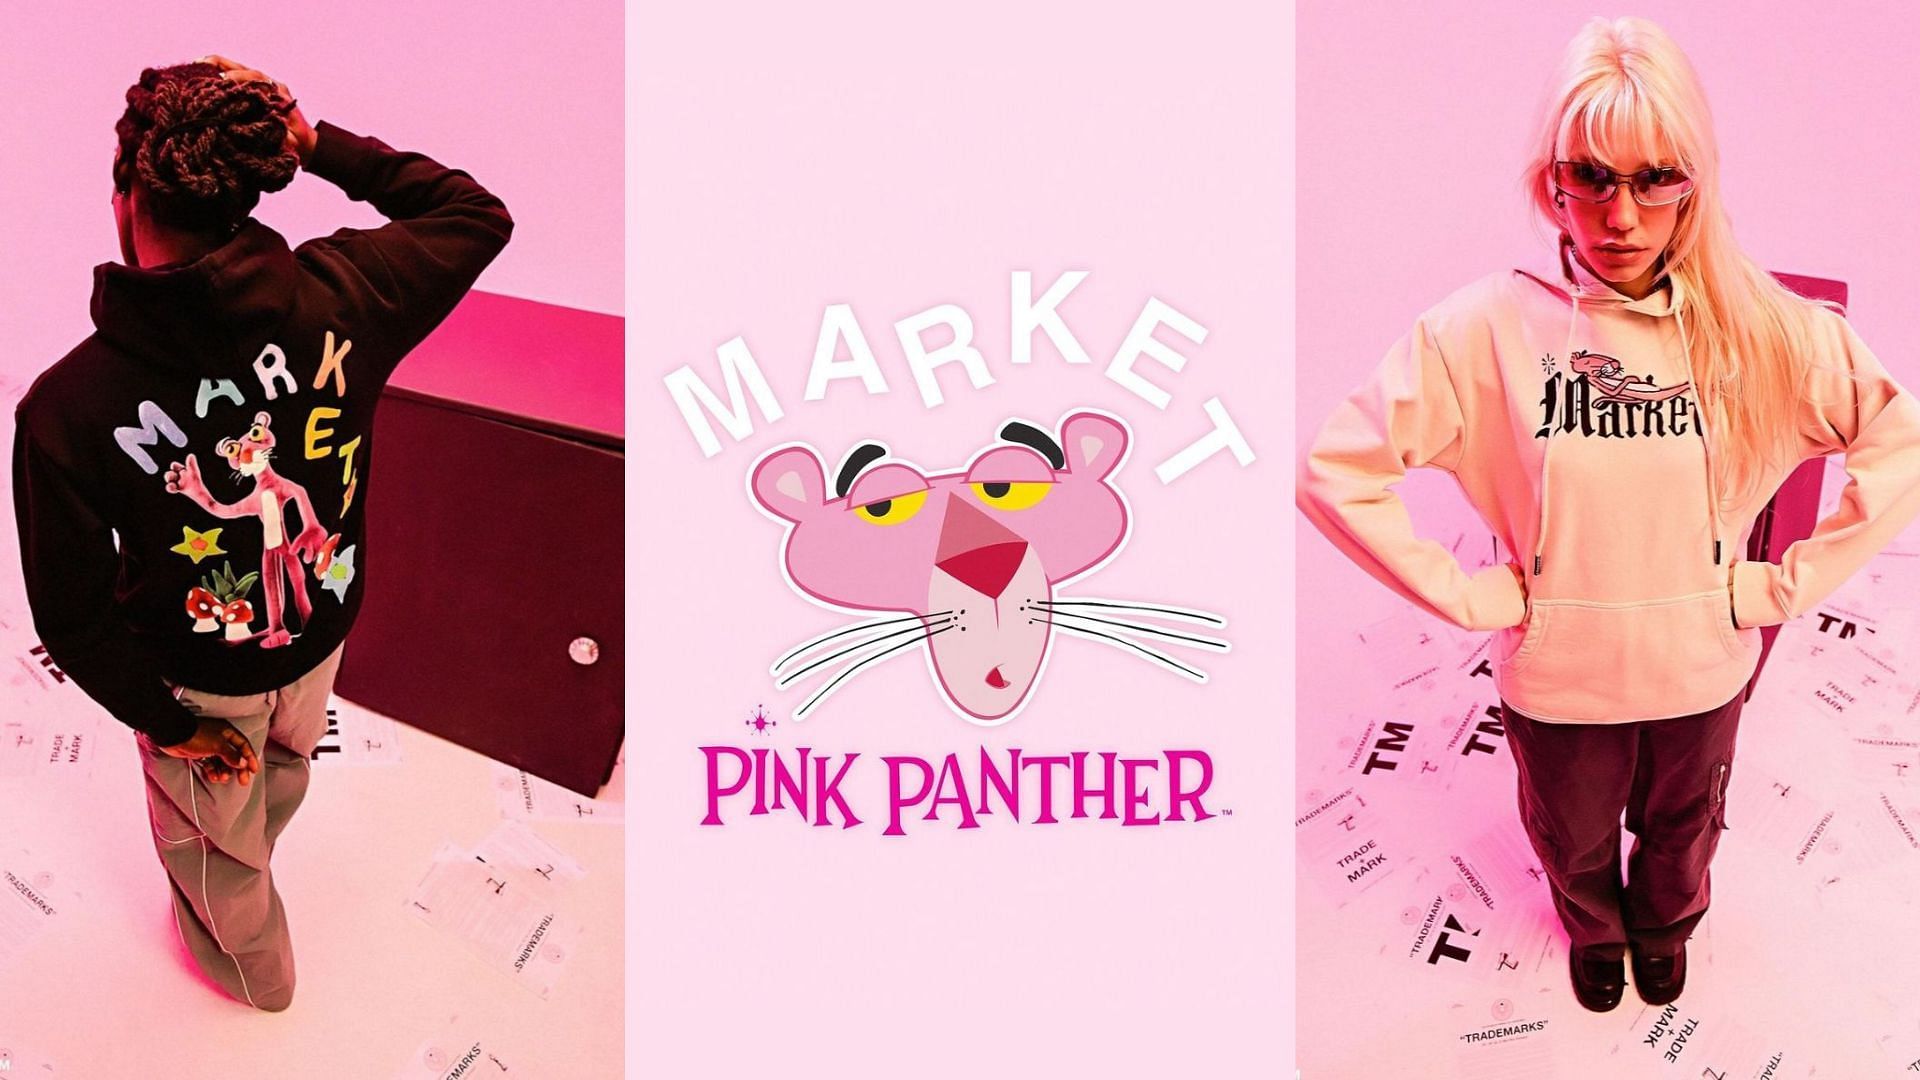 MARKET x Pink Panther capsule collection (Image via MARKET)